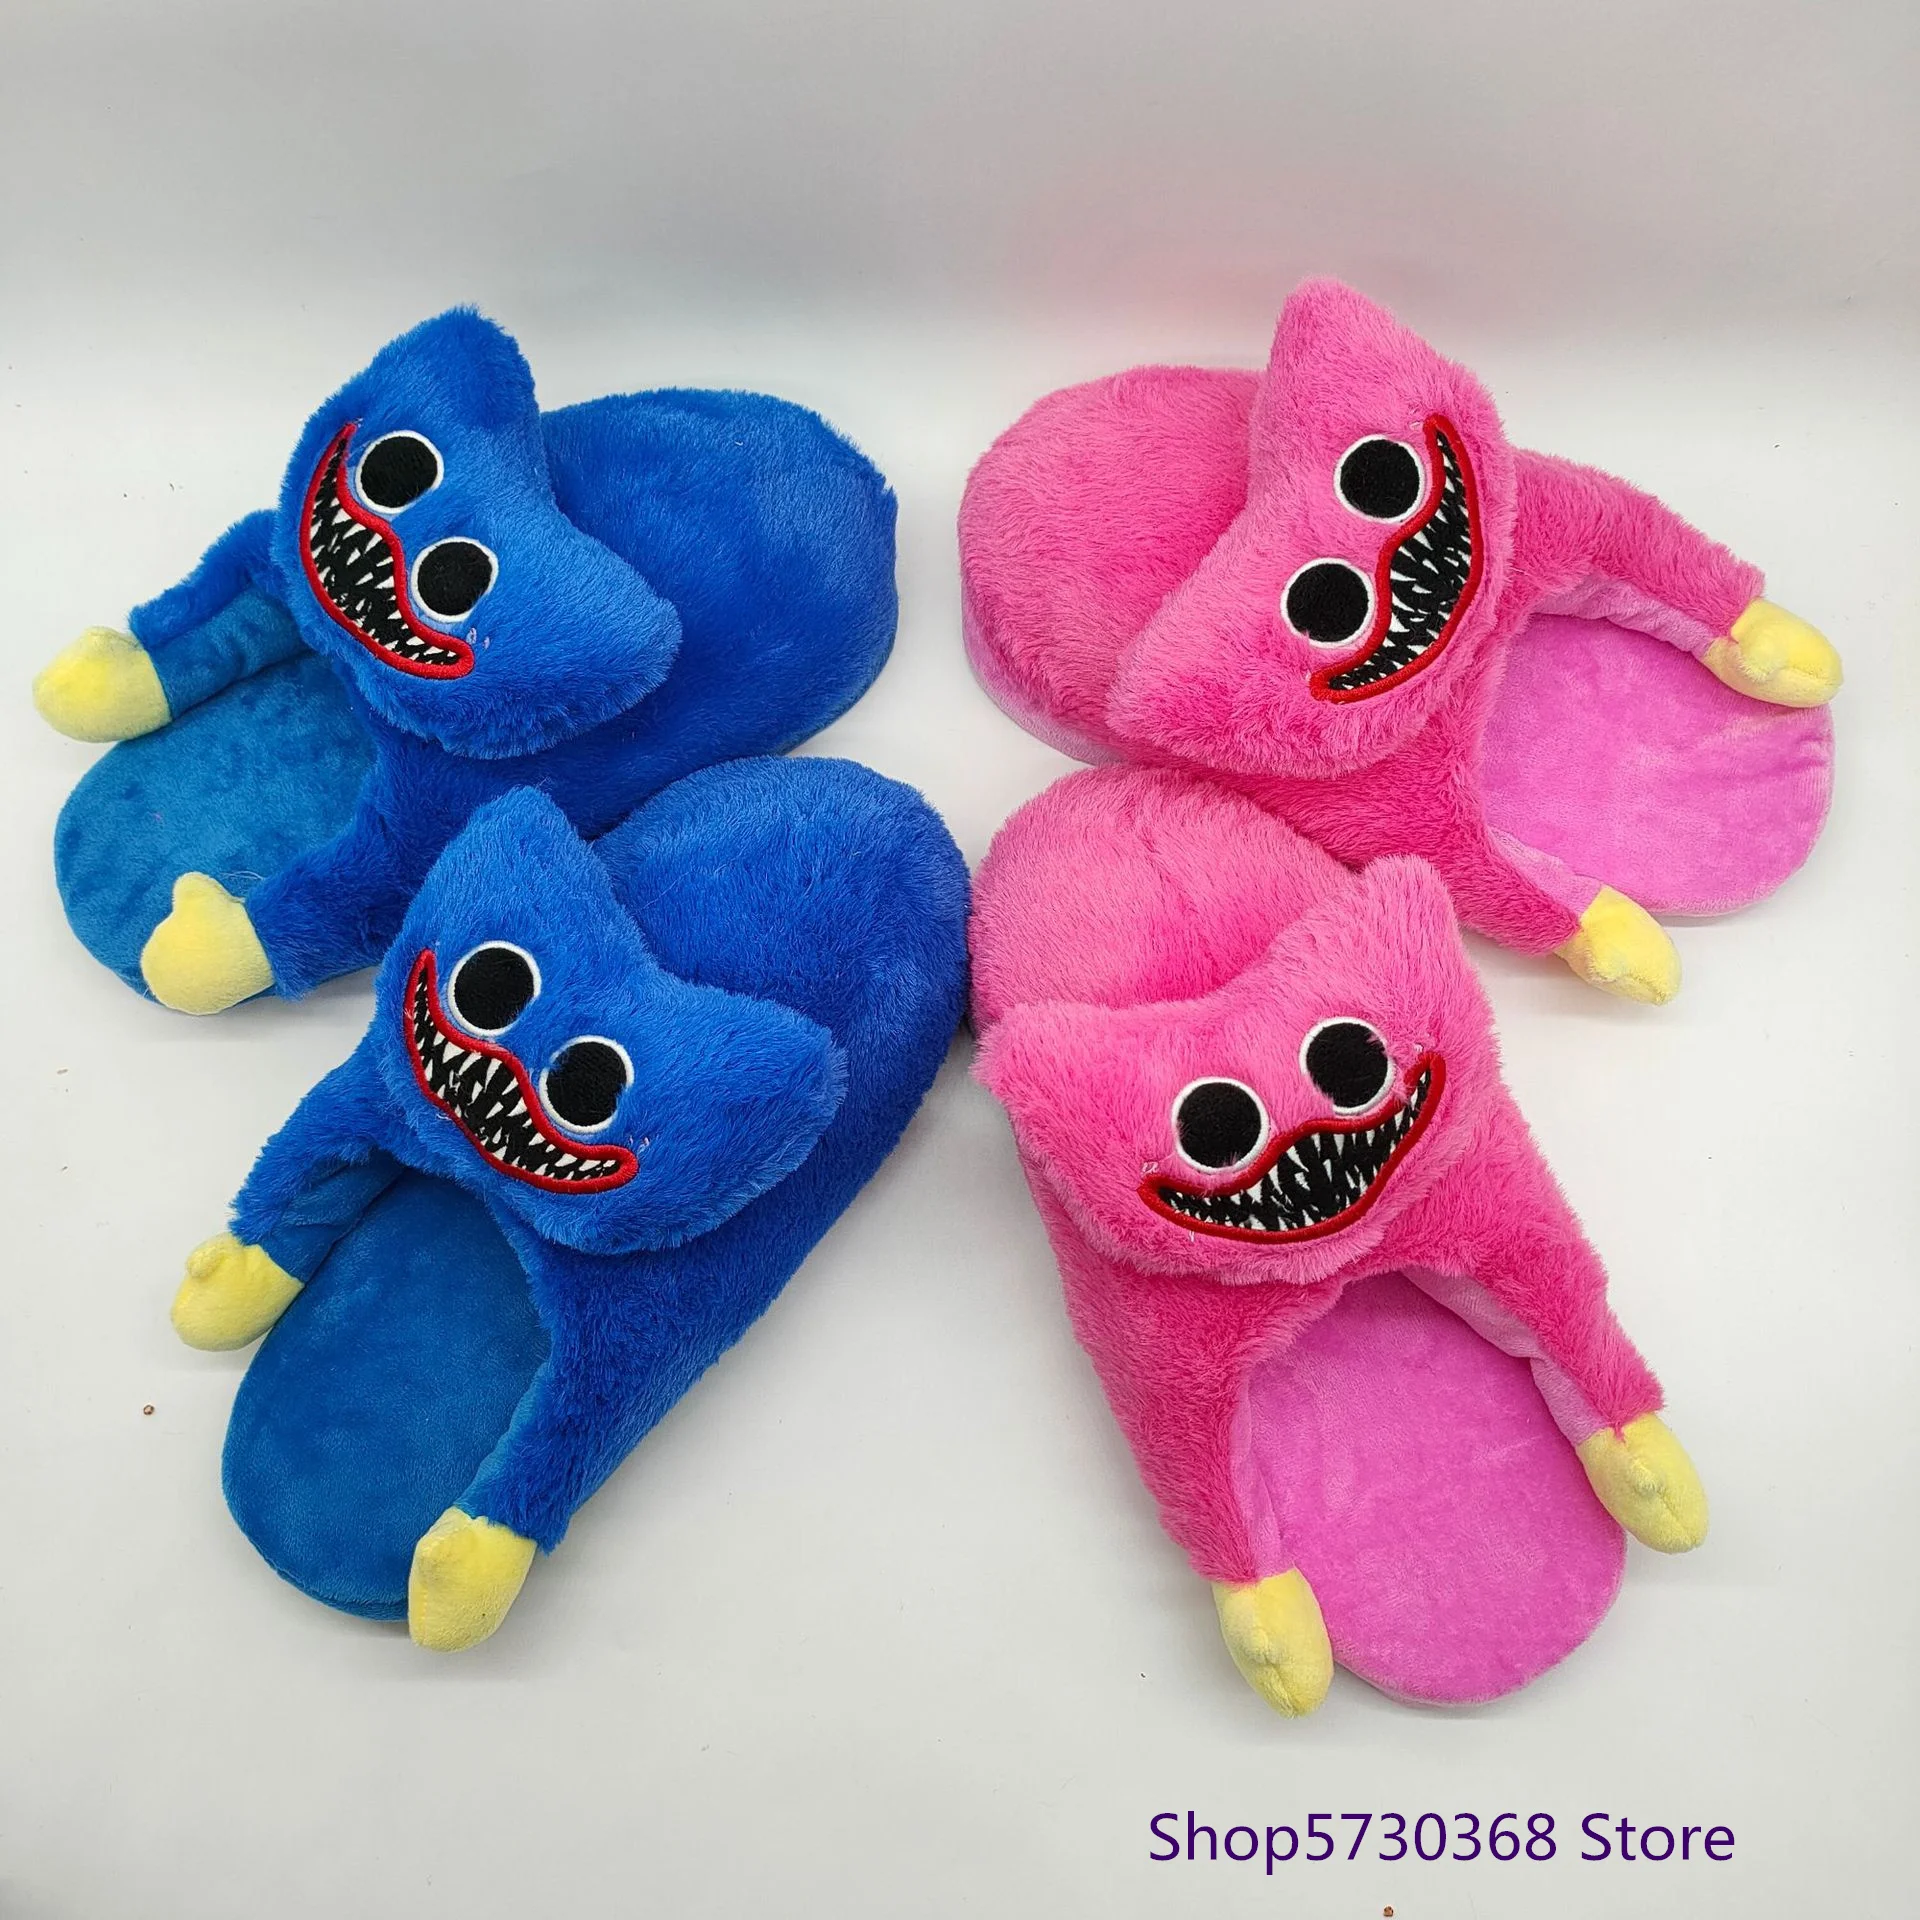 

Хаги Ваги Hague Vagi Toys Huggy Wuggy Plush Slippers Poppy Playtime Shoes Plush Doll Hot Scary Peluche Suffed Toys For Kids Gift